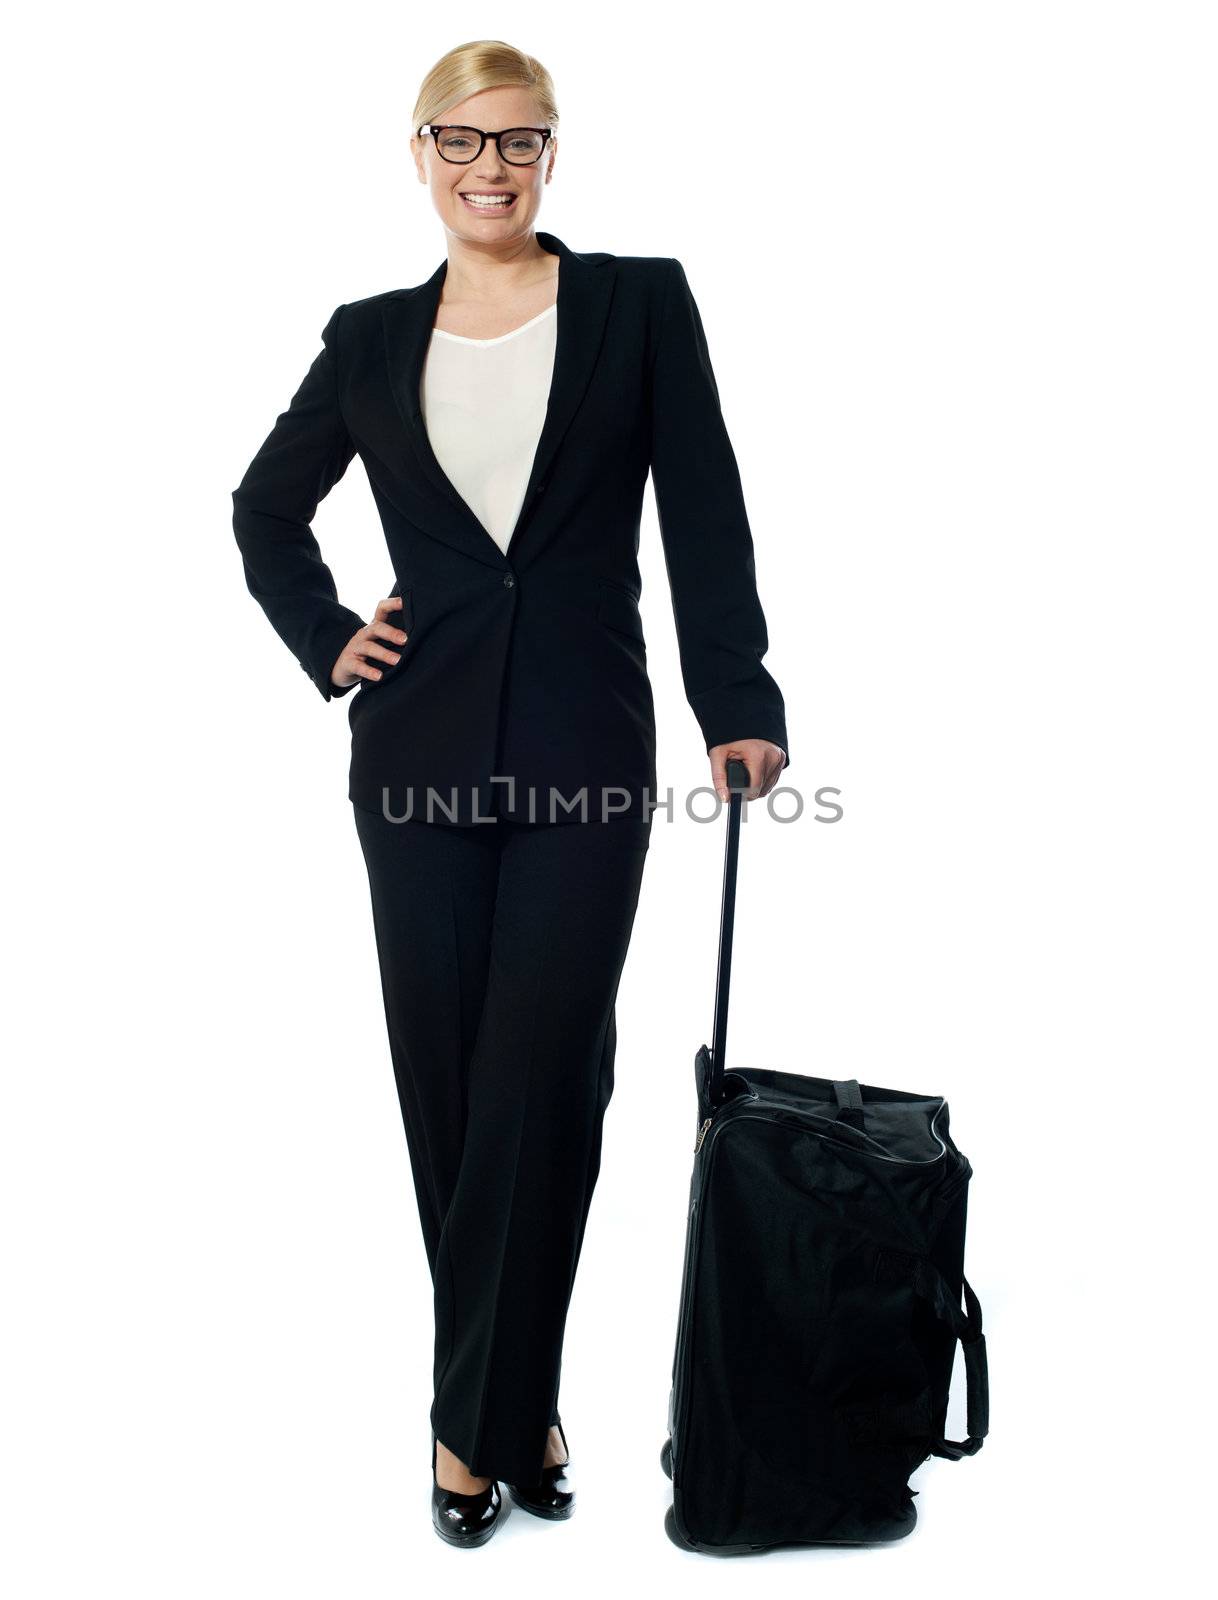 Corporate person carrying trolley bag by stockyimages